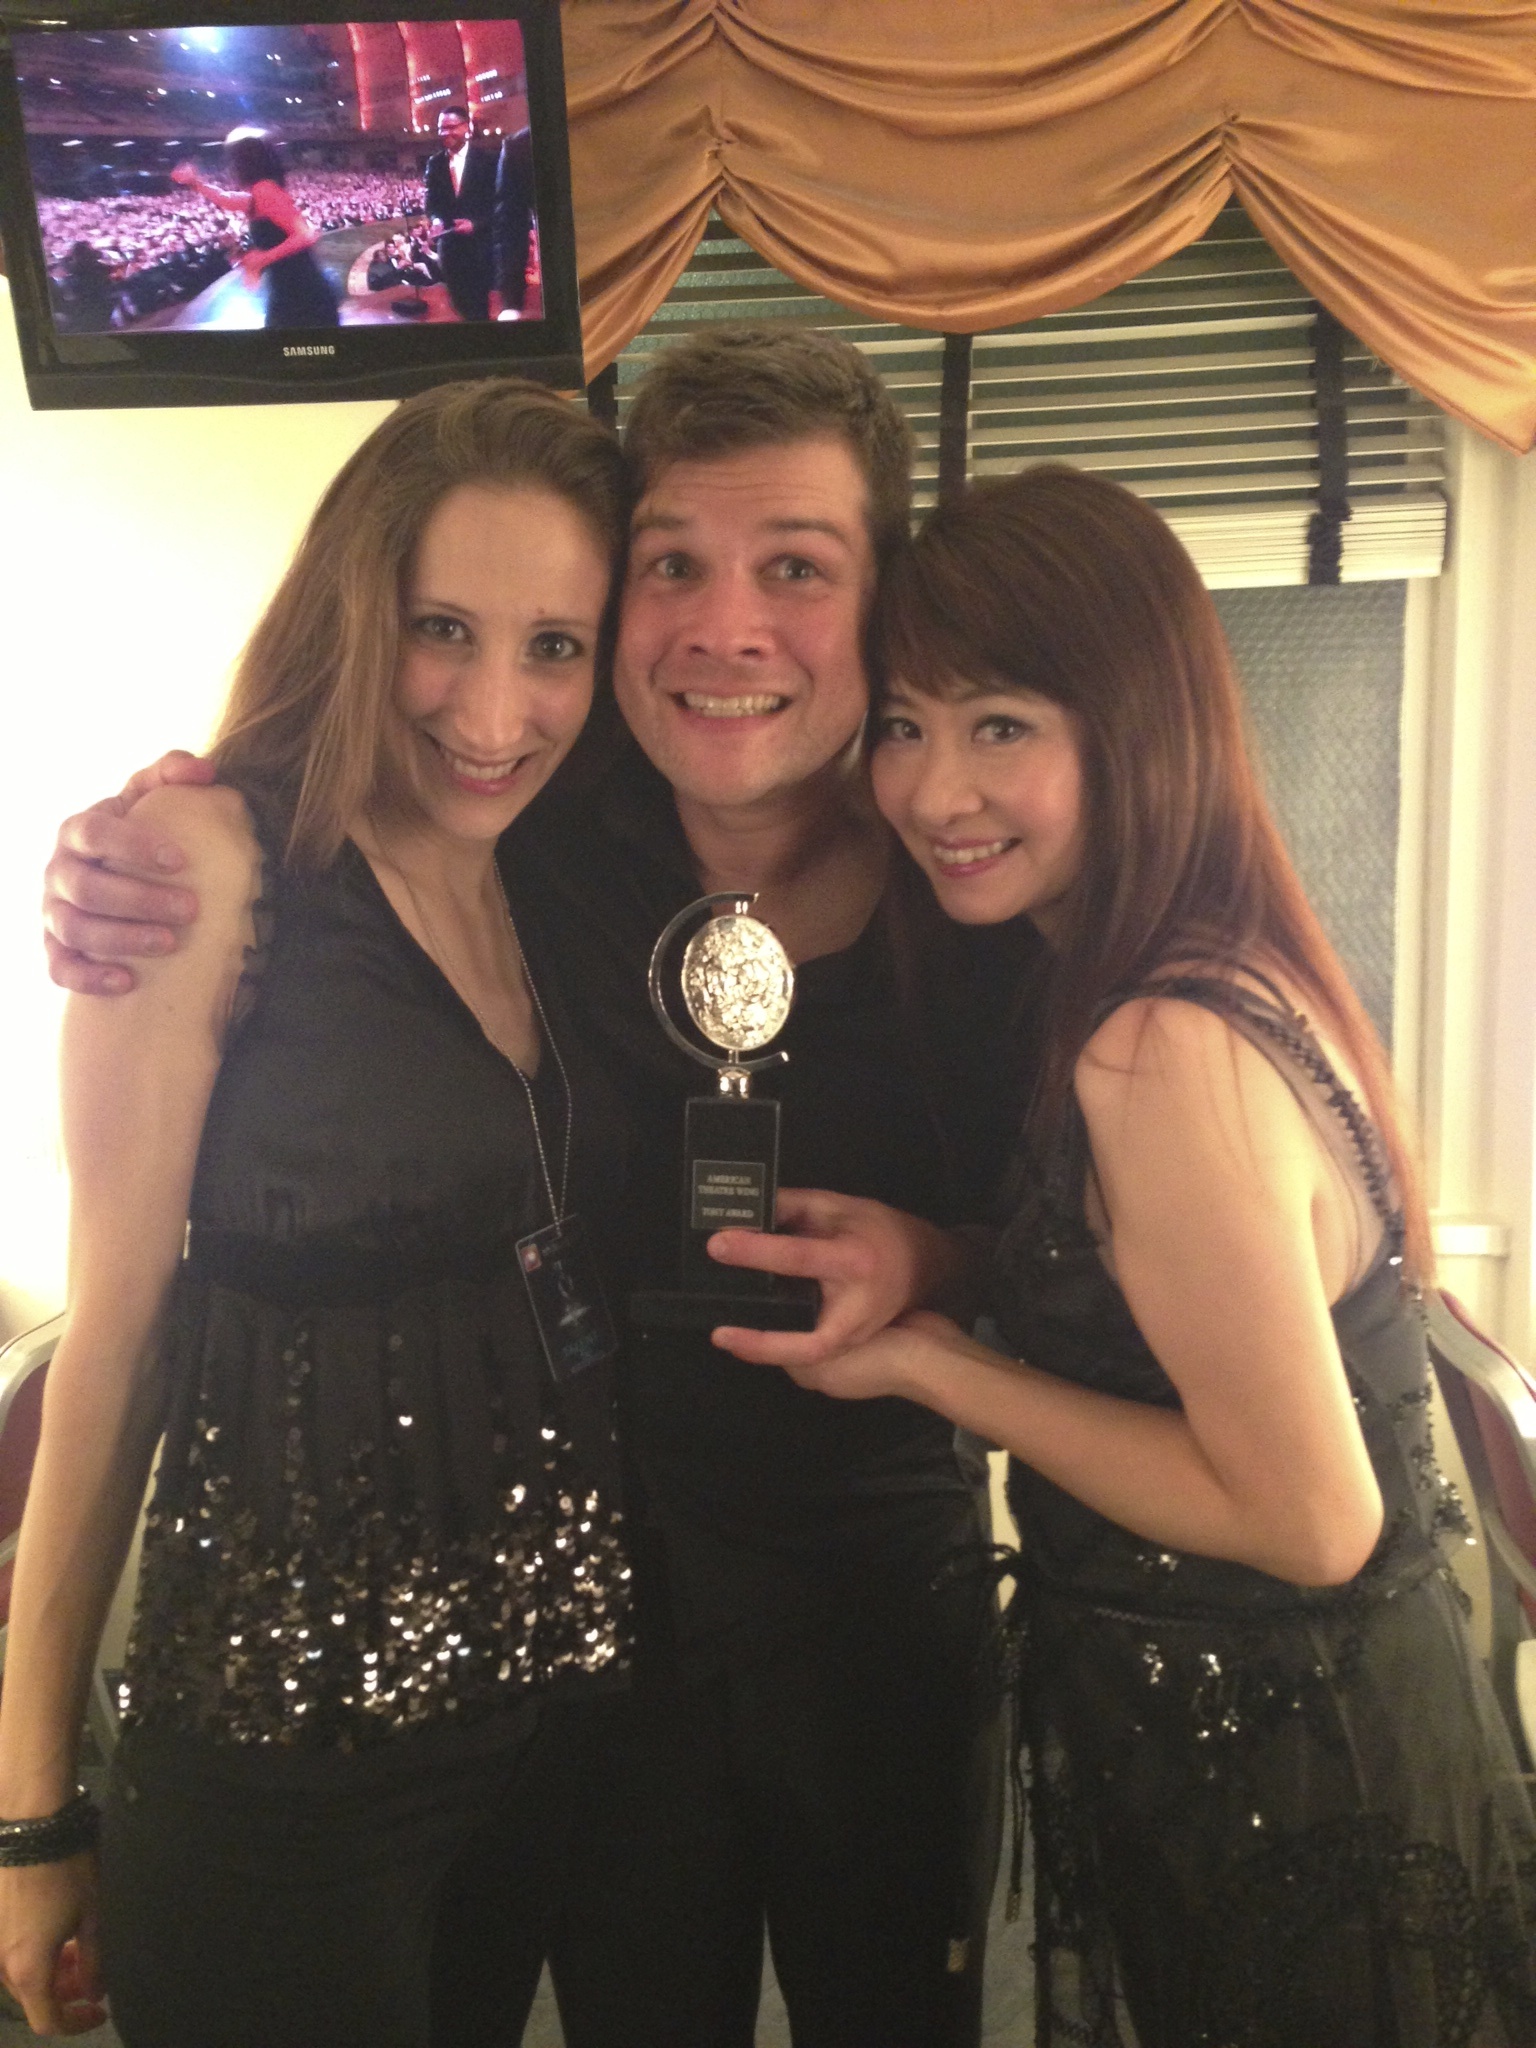 2013 Tony Awards. Hiroko and Allison backstage with Stephen Oremus after his Tony win for Best Orchestrations!